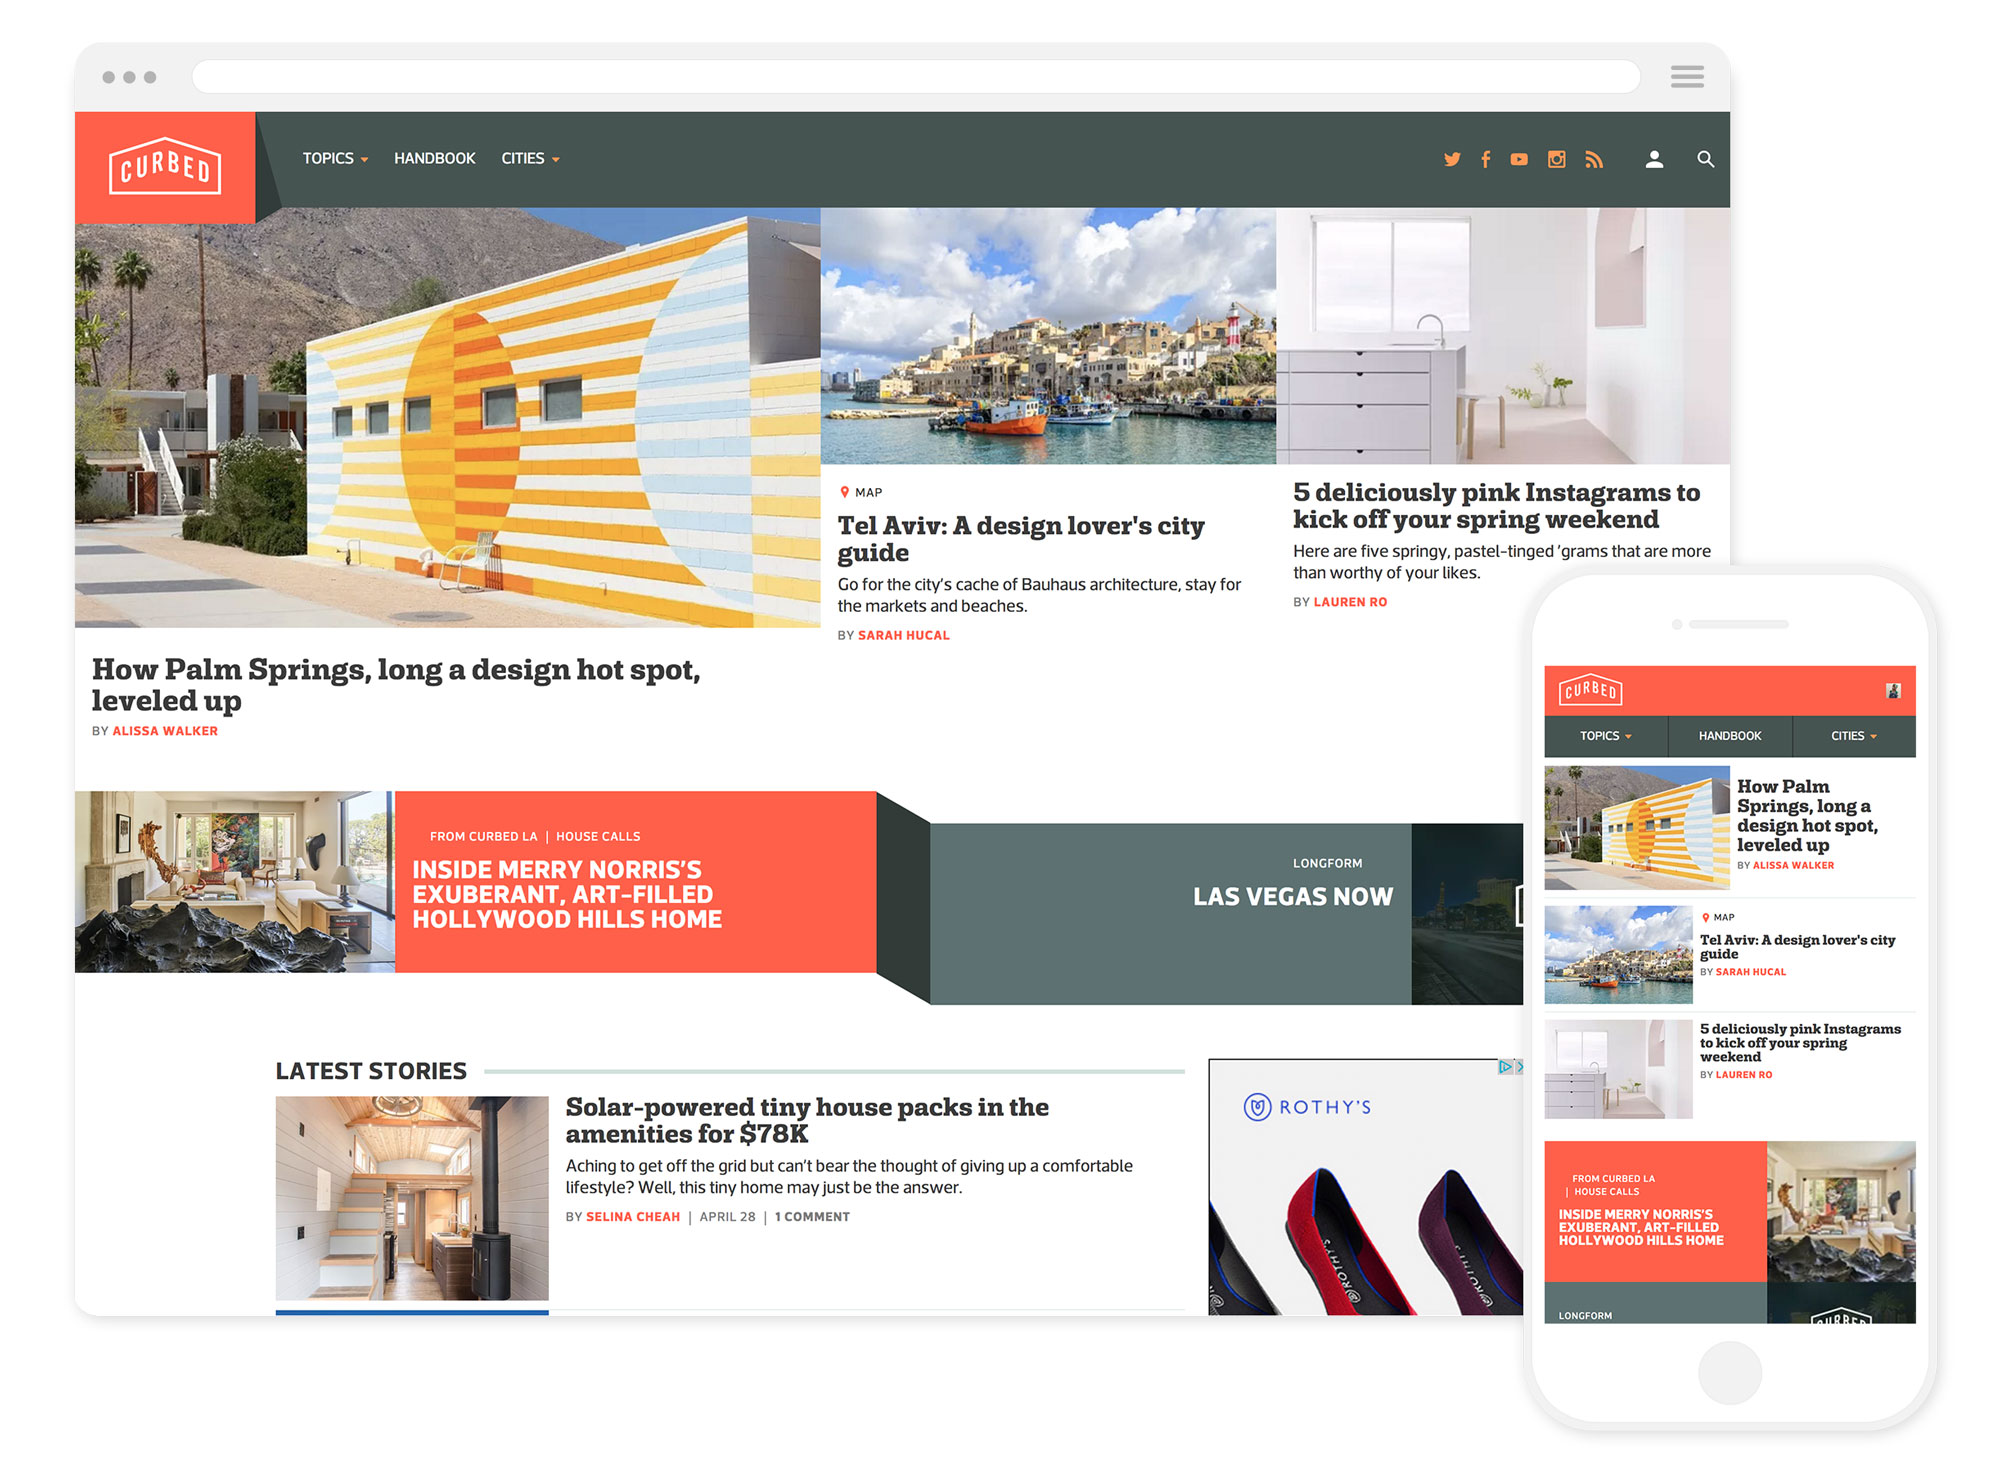 Curbed's homepage